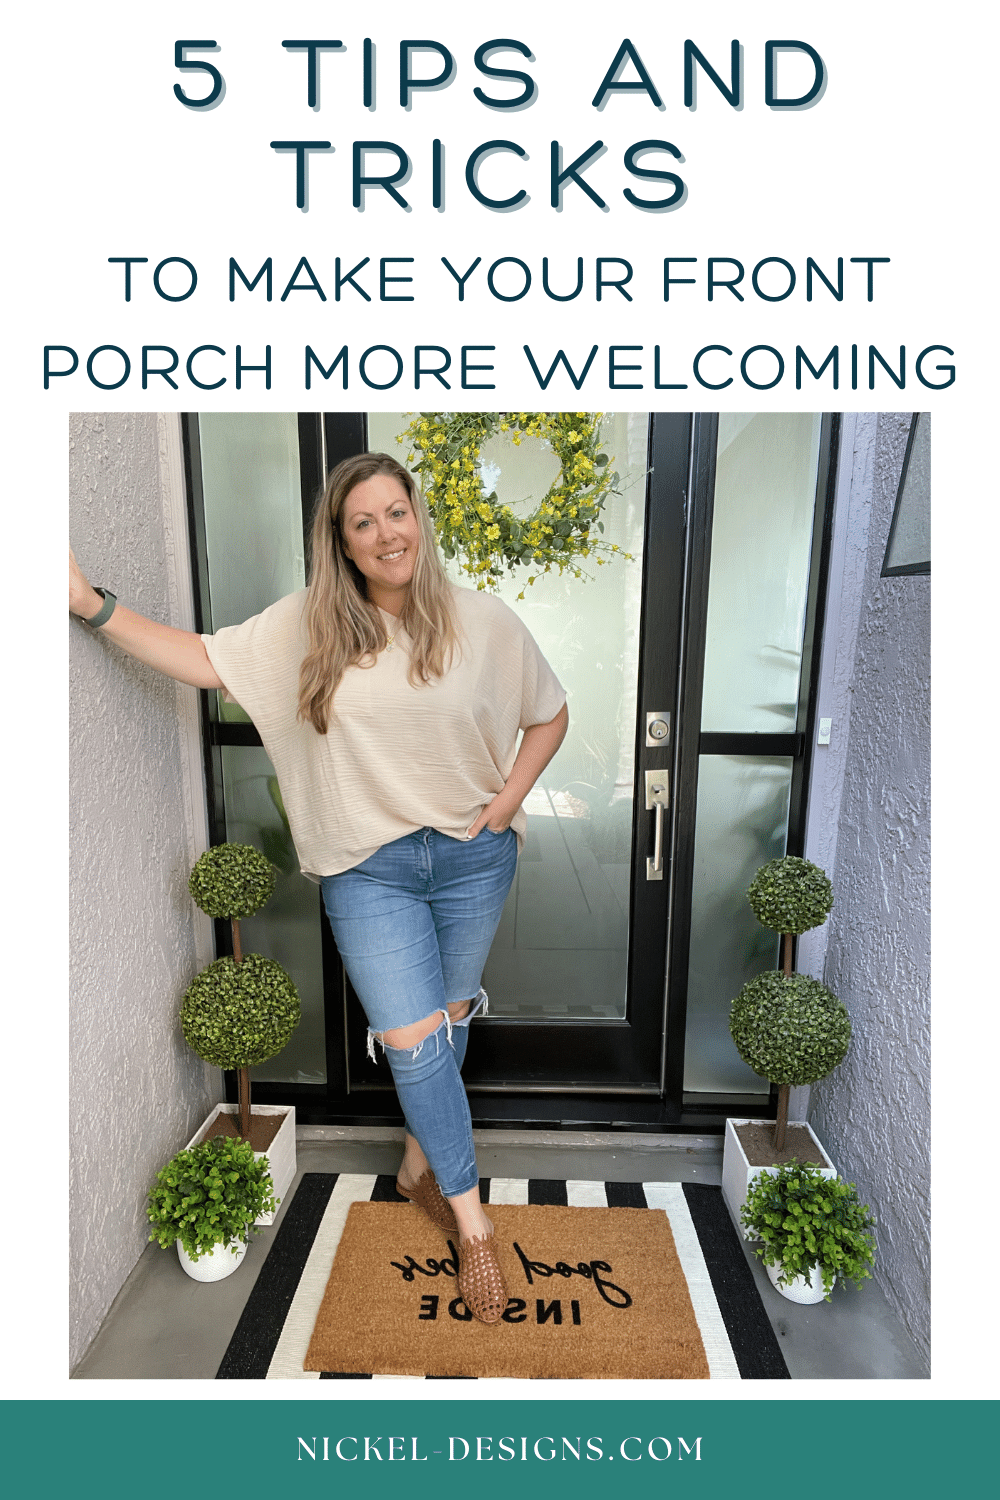 5 Tips And Tricks To Make Your Front Porch More Welcoming